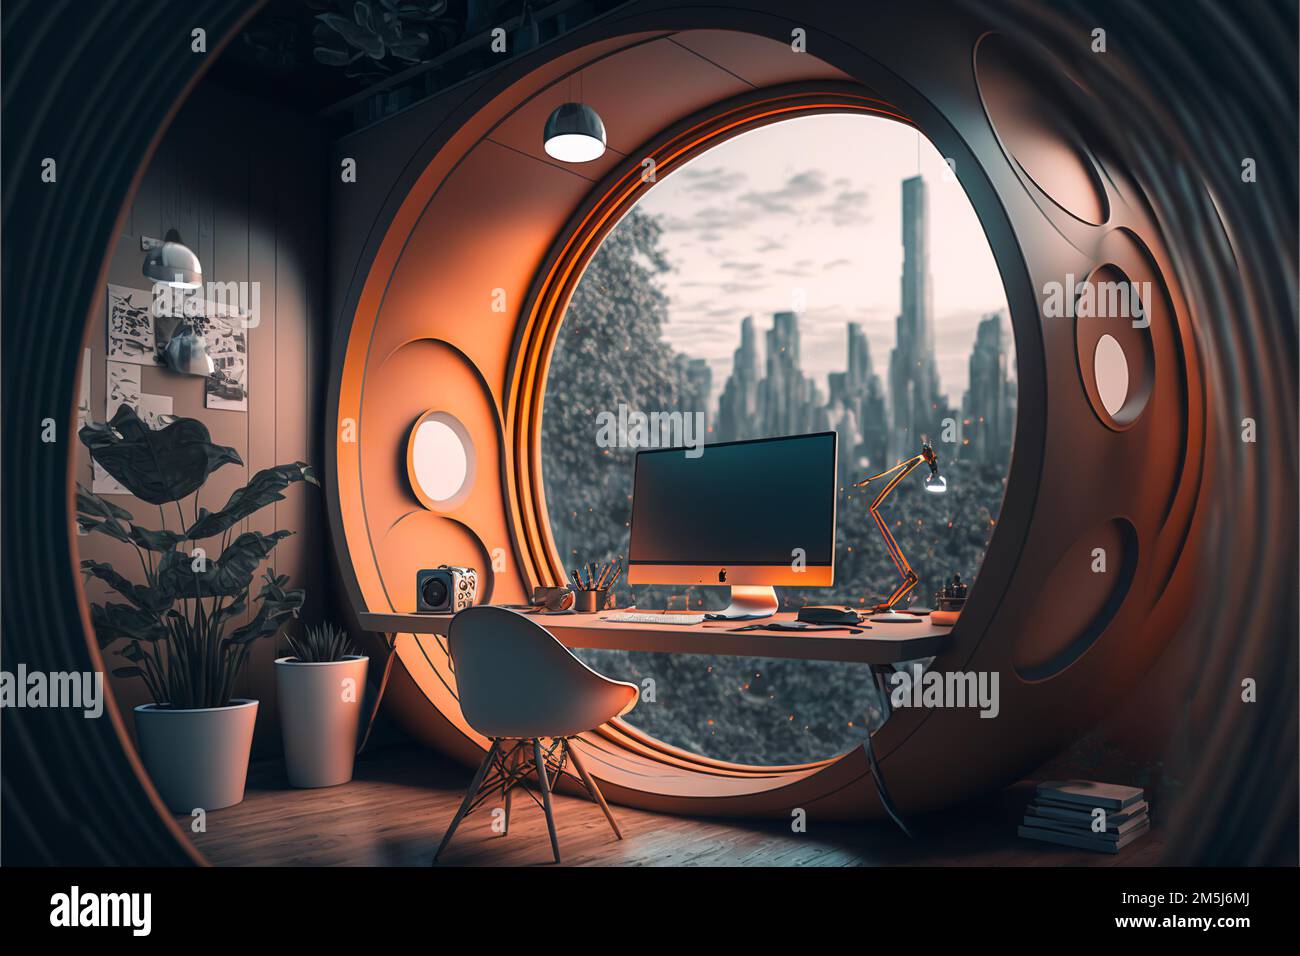 Futuristic Designer Office with Sleek Architecture and Modern Design in Ultra High Resolution, Art, Architecture Stock Photo